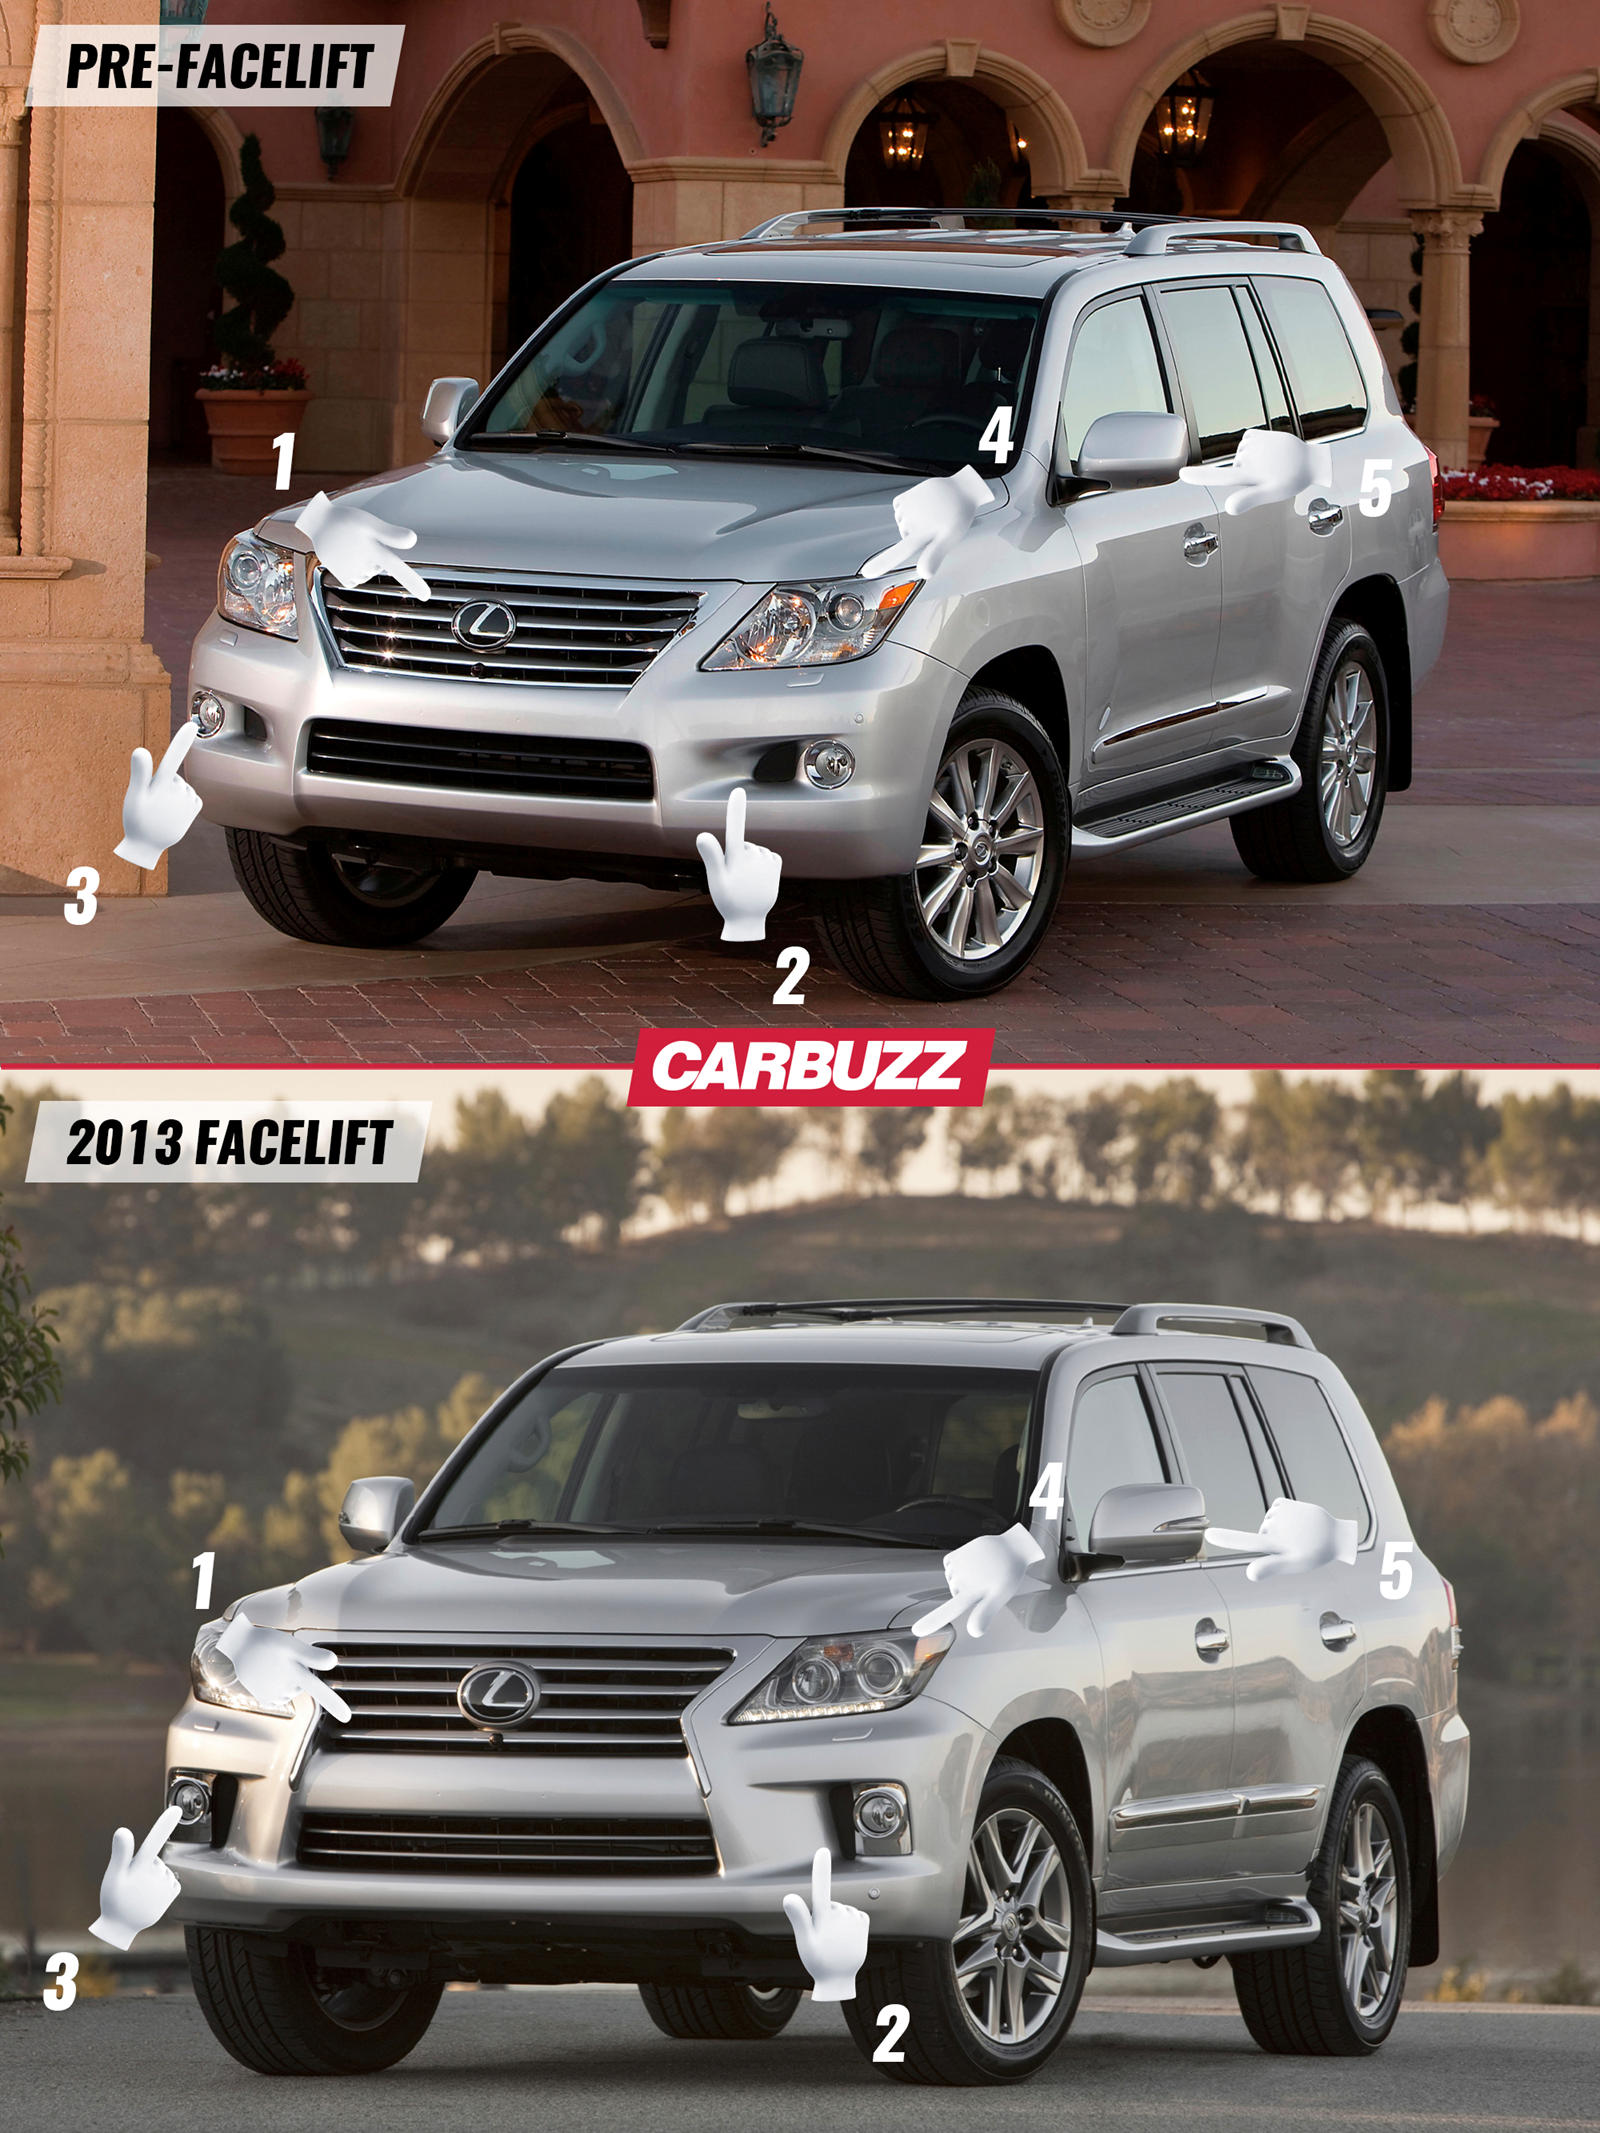 Lexus LX 570 3rd Generation (J200) - What To Check Before You Buy